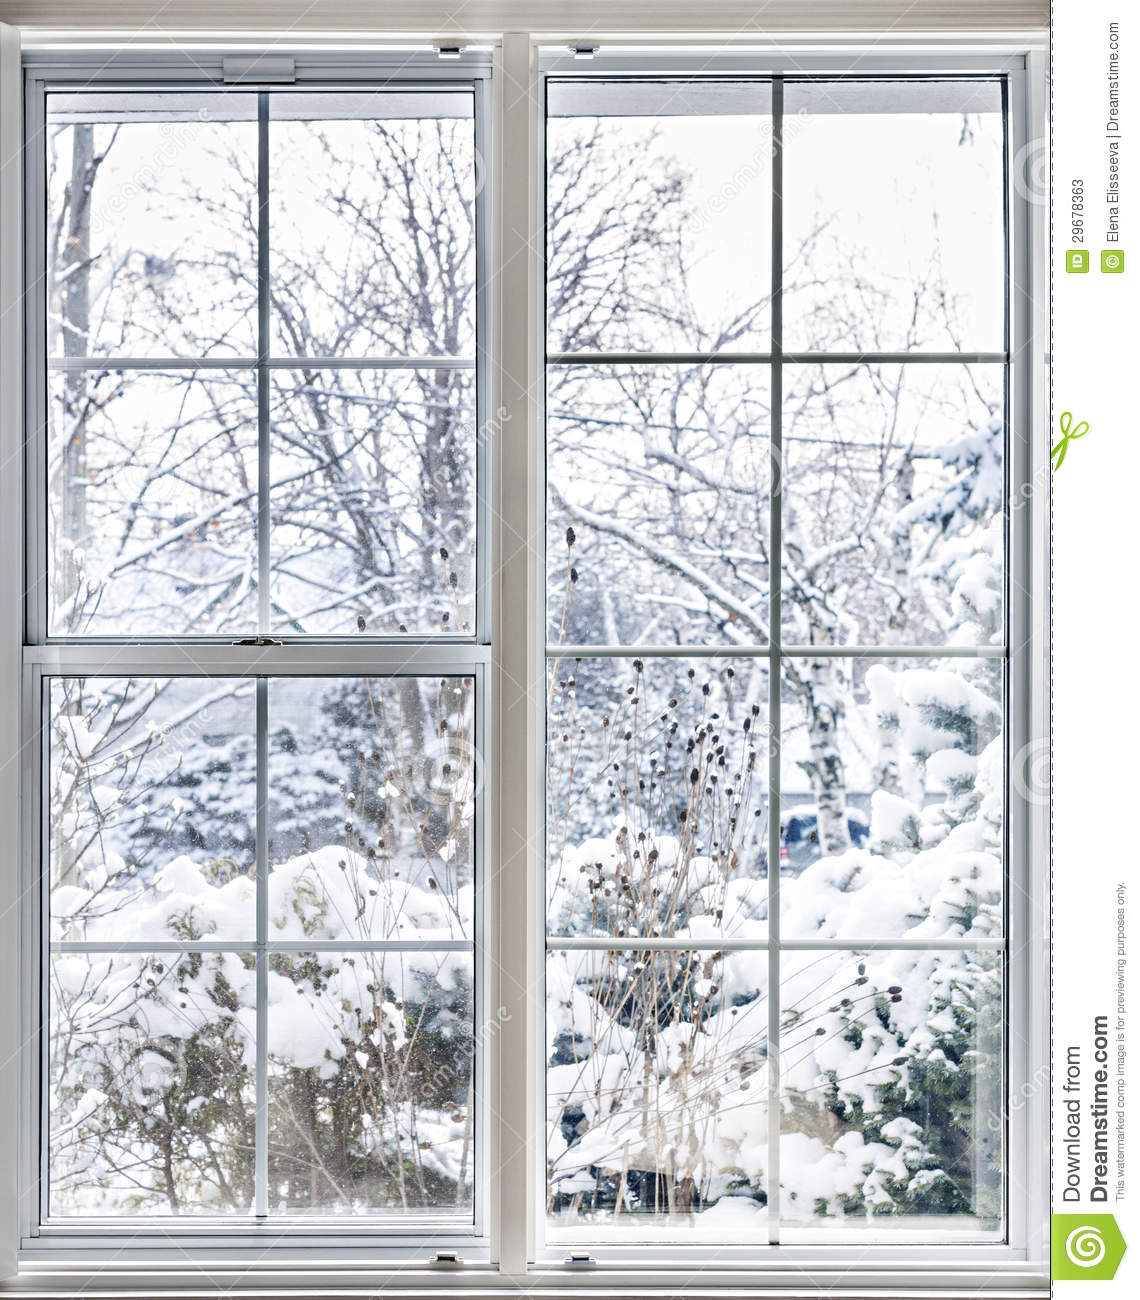 Vinyl Insulated Windows With Winter View Of Snowy Trees And Plants